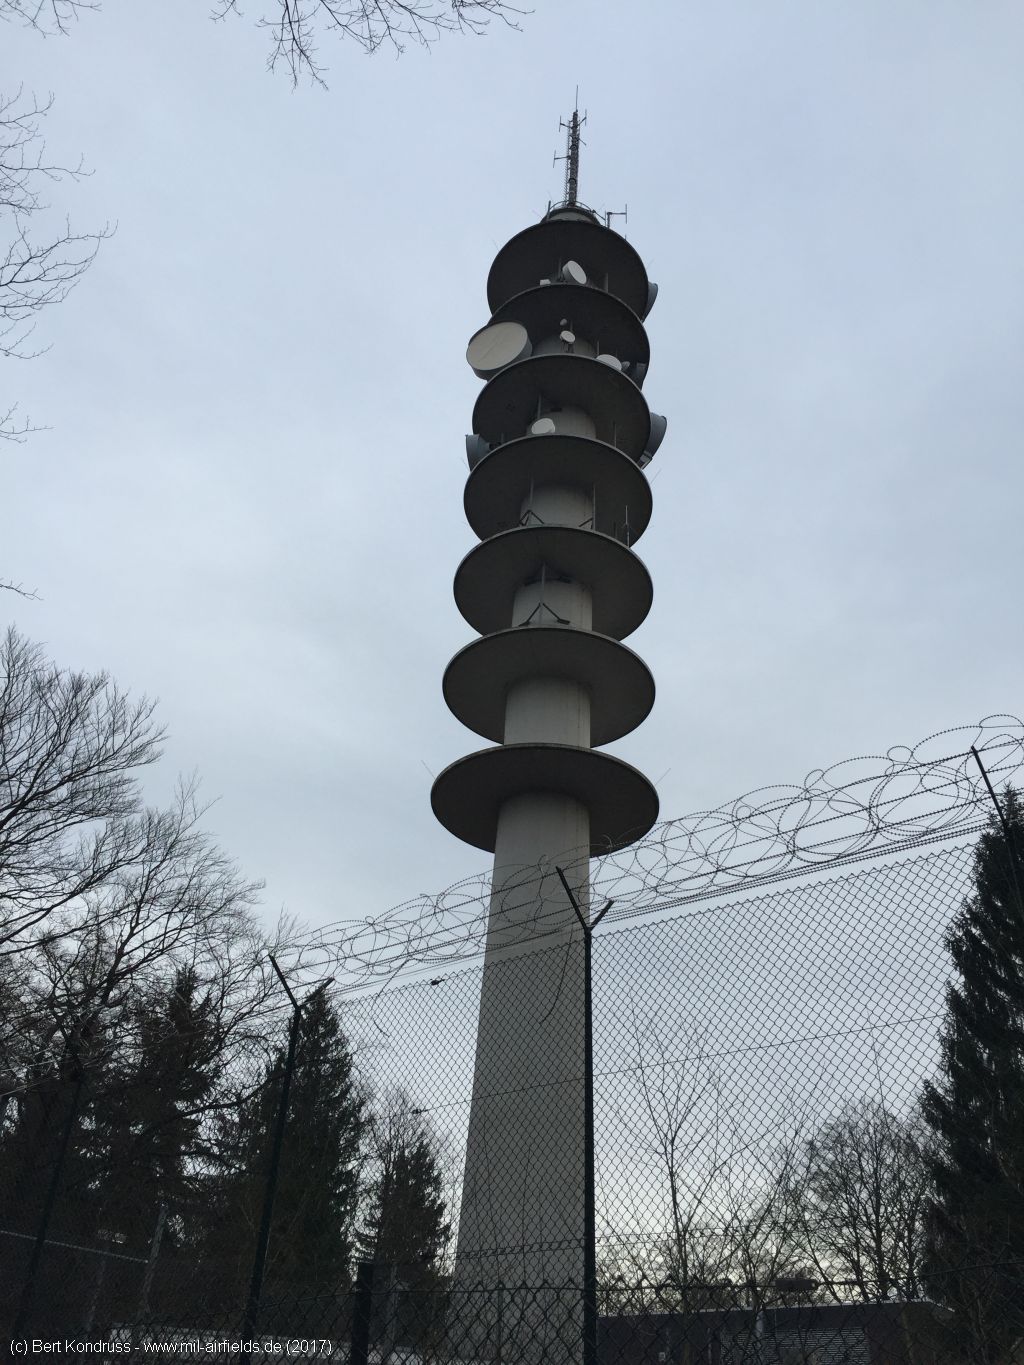 US Army telecommunications tower / microwave site